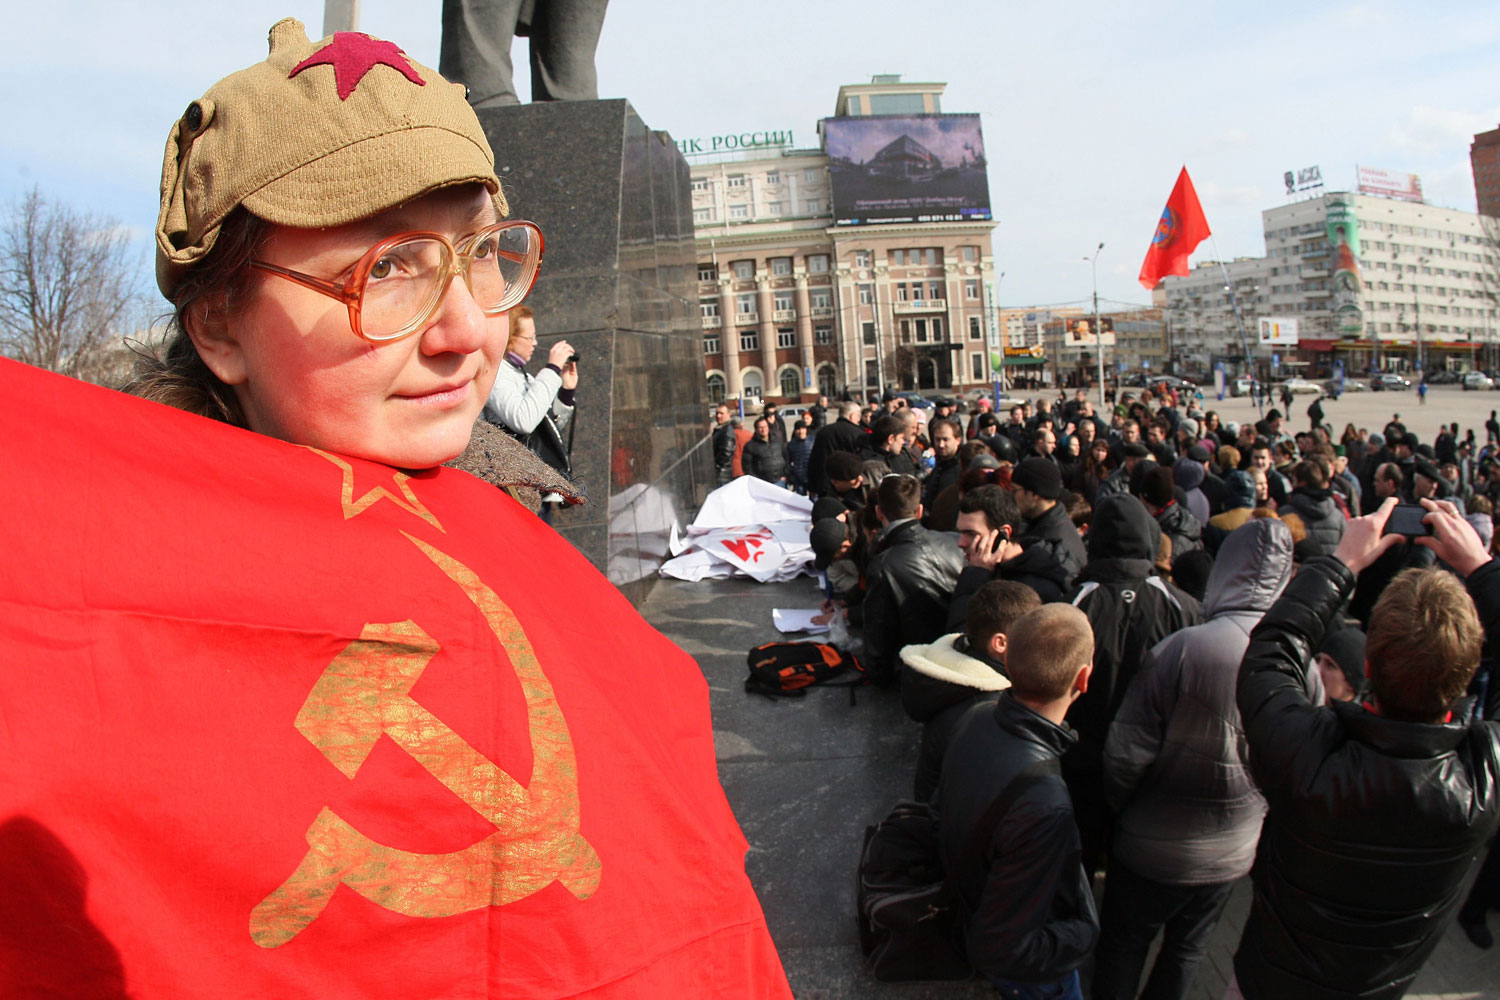 A Ukrainian woman holds a Soviet flag during a rally in the eastern industrial city of Donetsk on Feb. 22, 2014